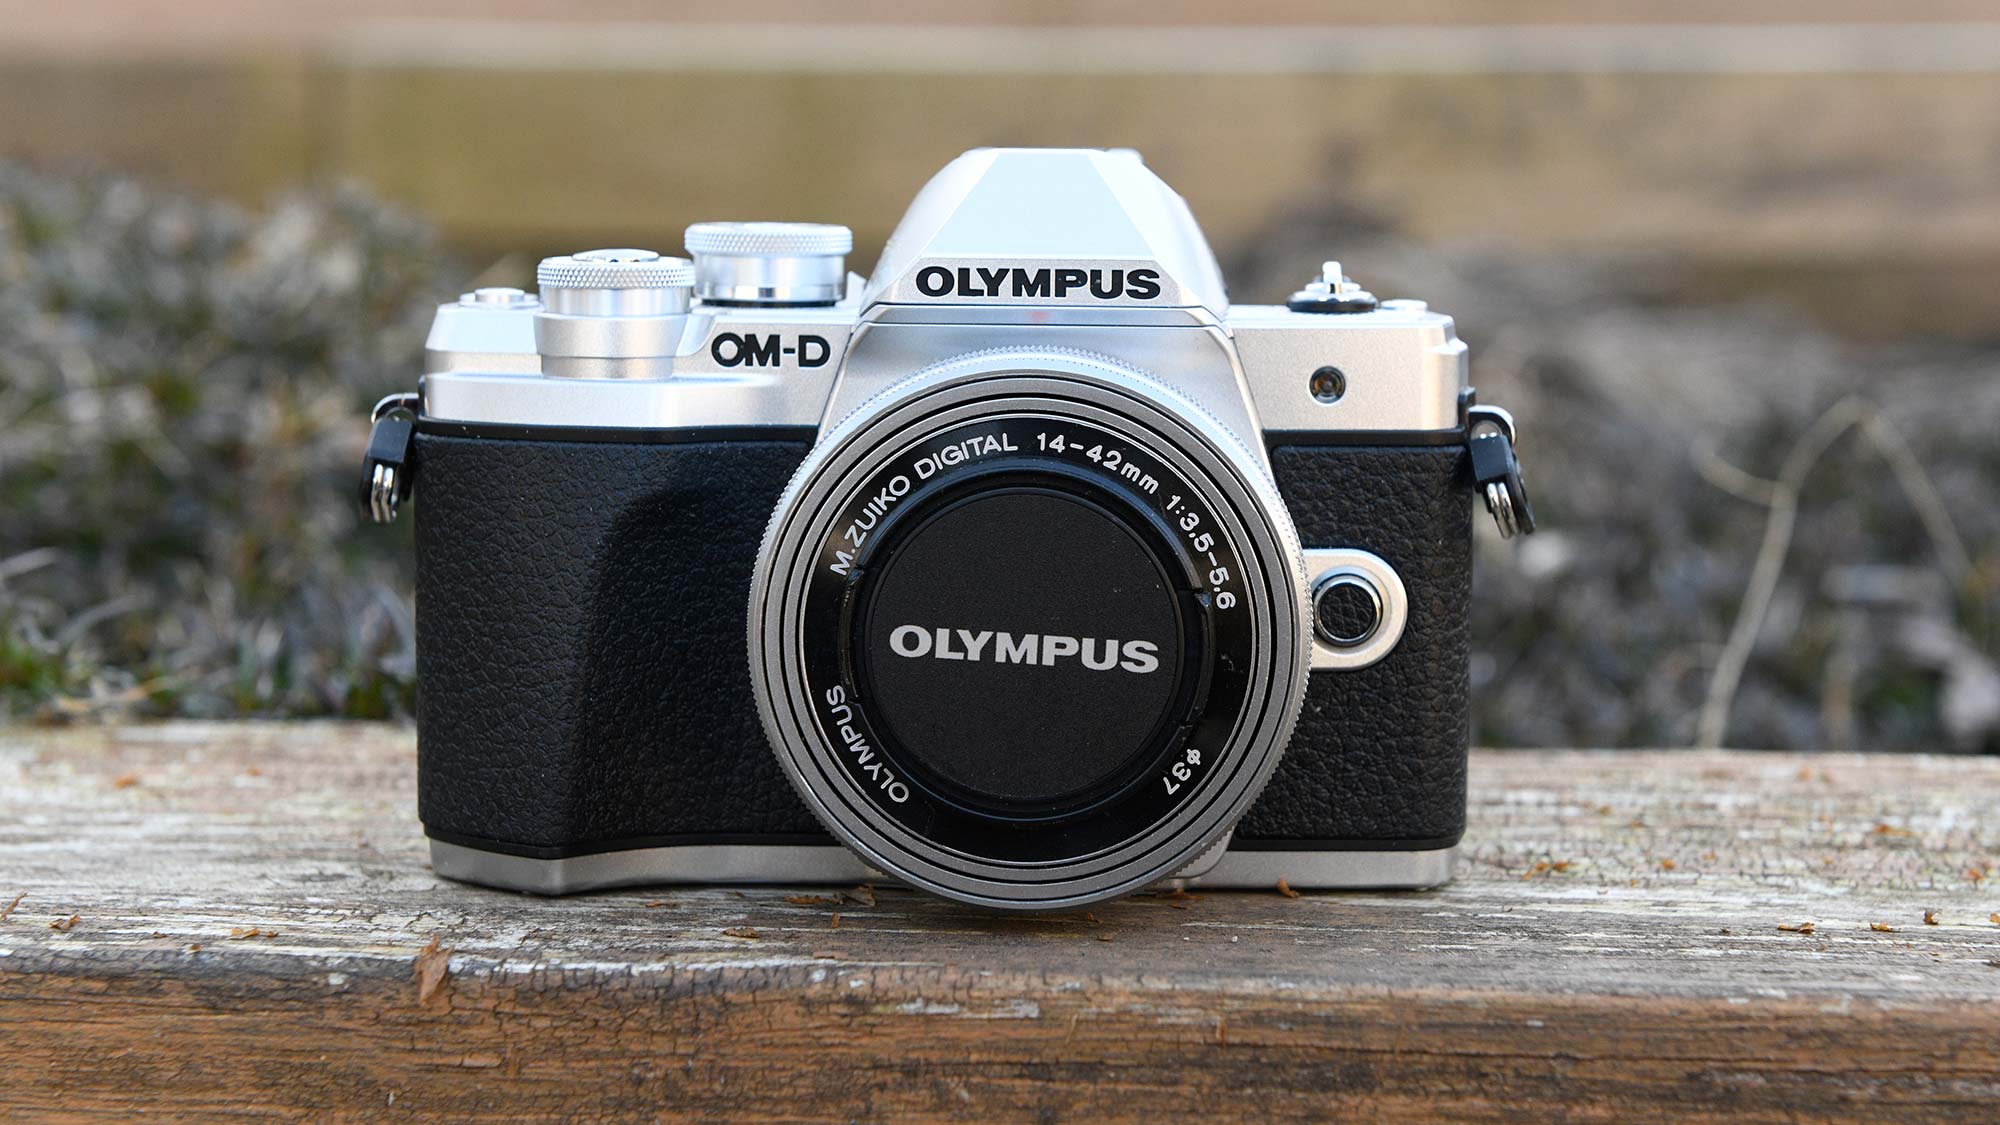 Olympus O-MD E-M10 Mark III review | Tom's Guide